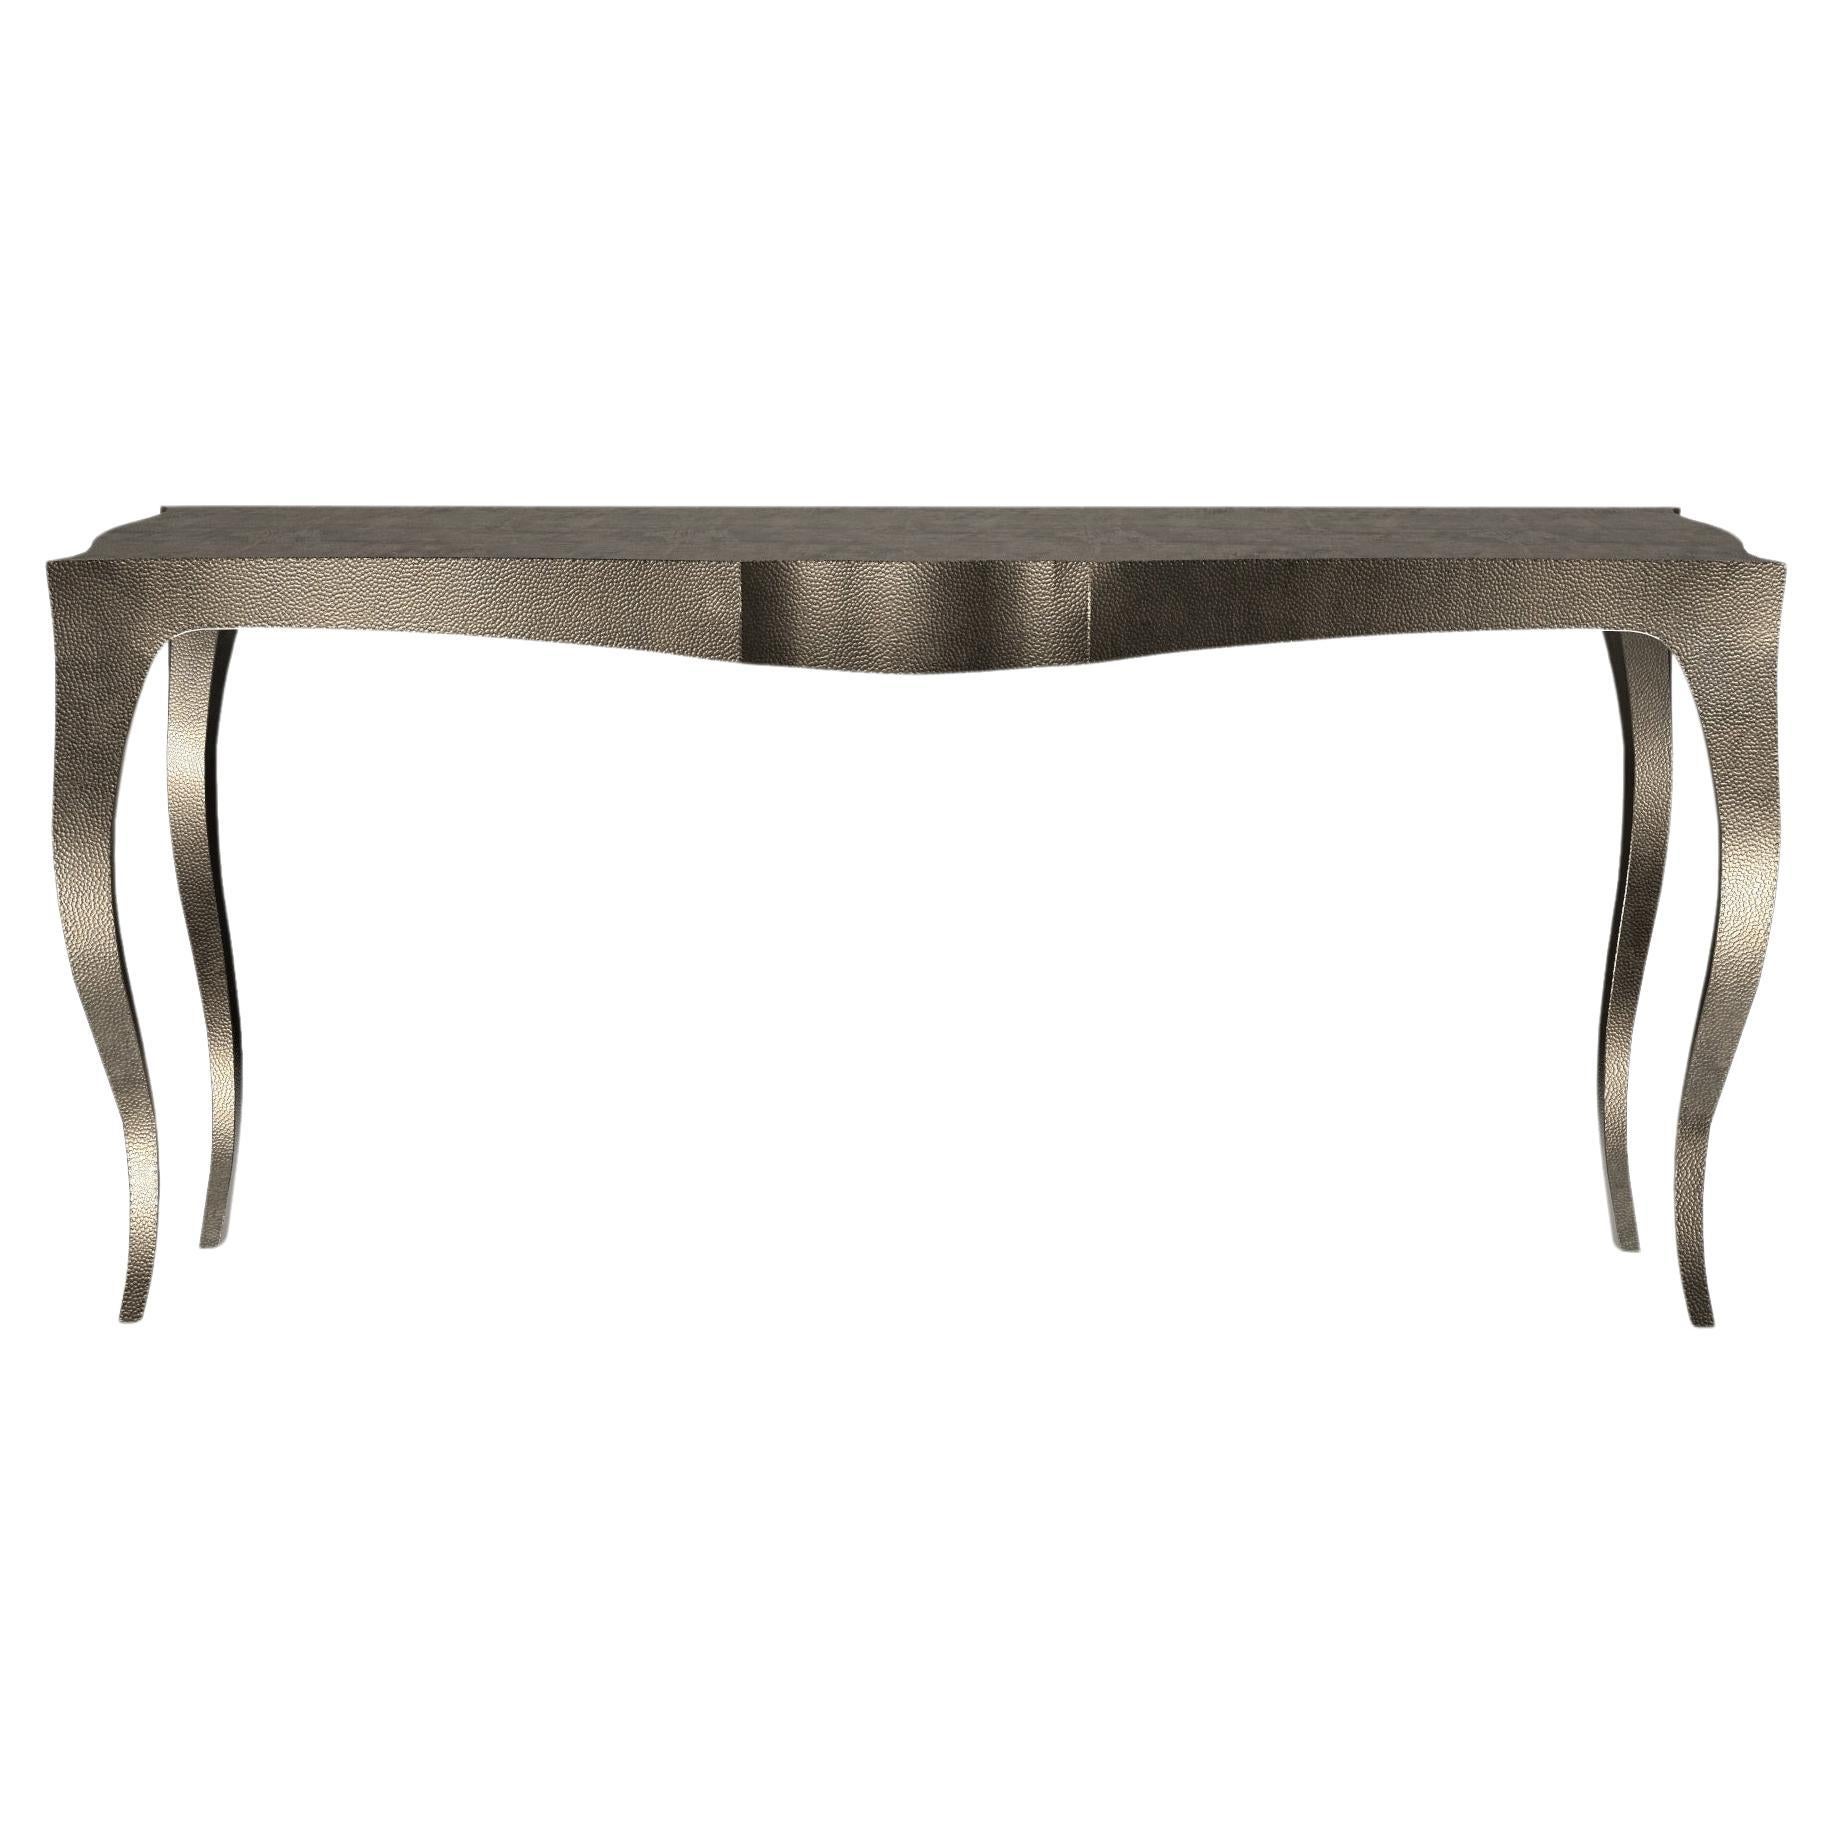 Louise Console Art Deco Industrial and Work Tables Mid. Hammered Antique Bronze